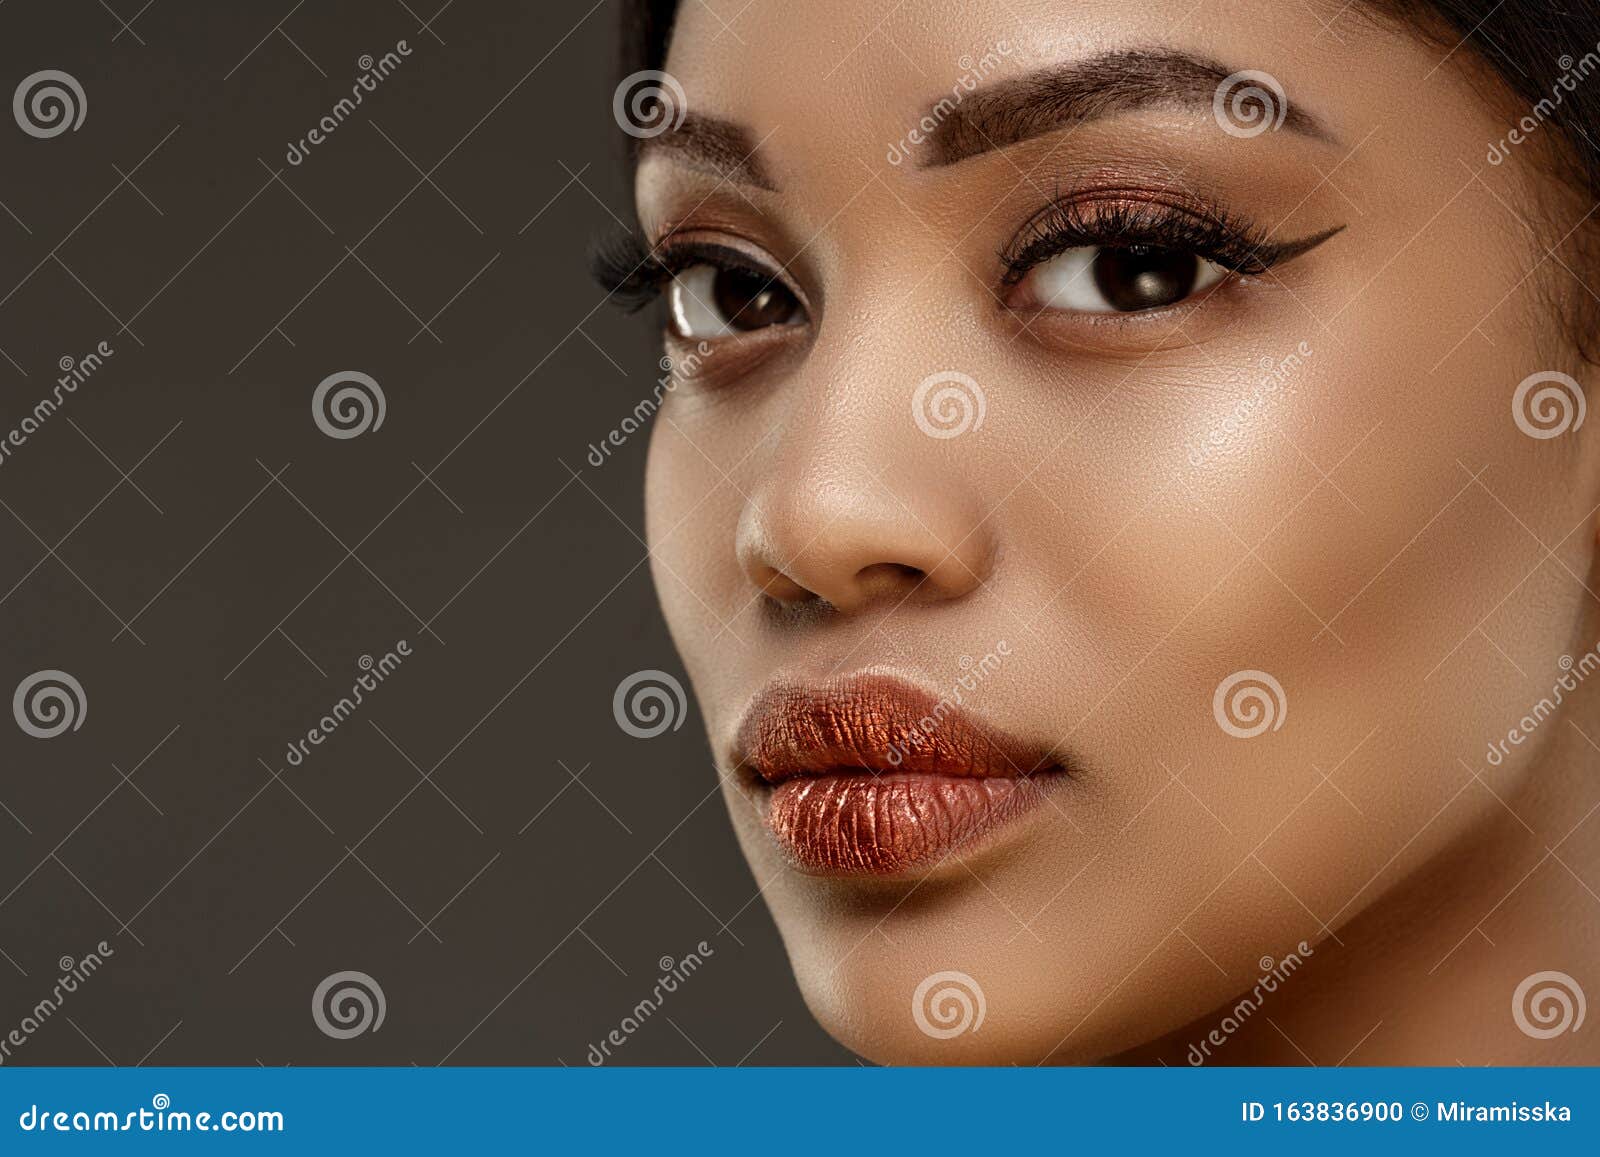 beauty black skin woman african ethnic female face. young african american model. lux model